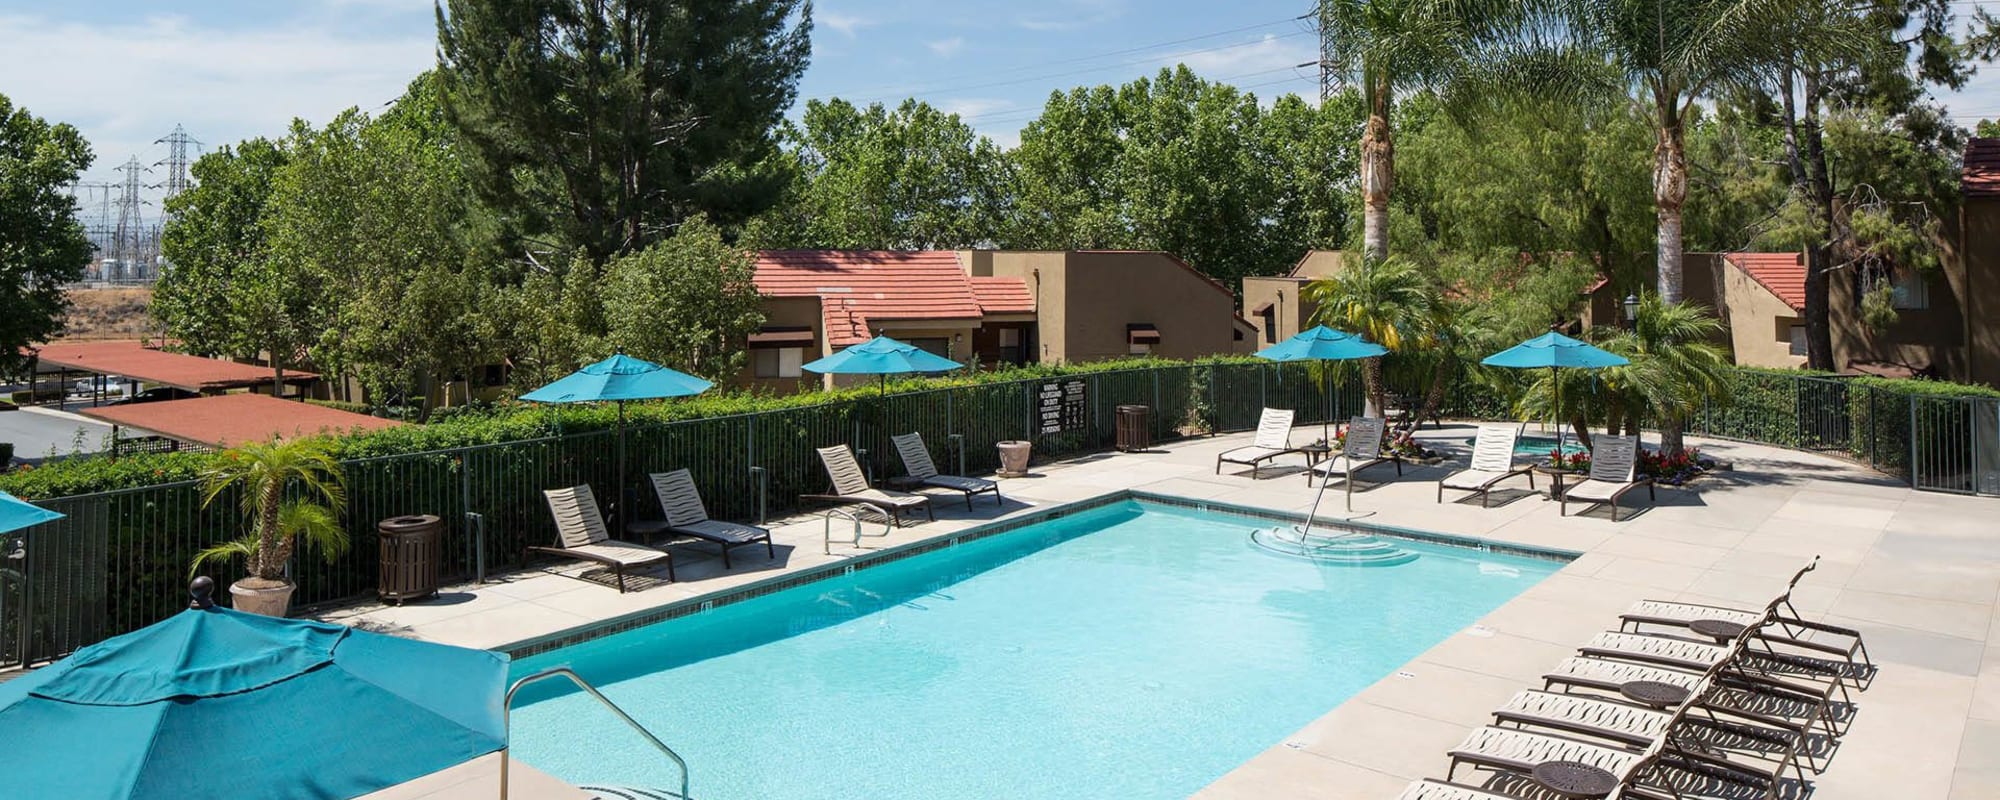 Apartments at The Highlands at Grand Terrace in Grand Terrace, California